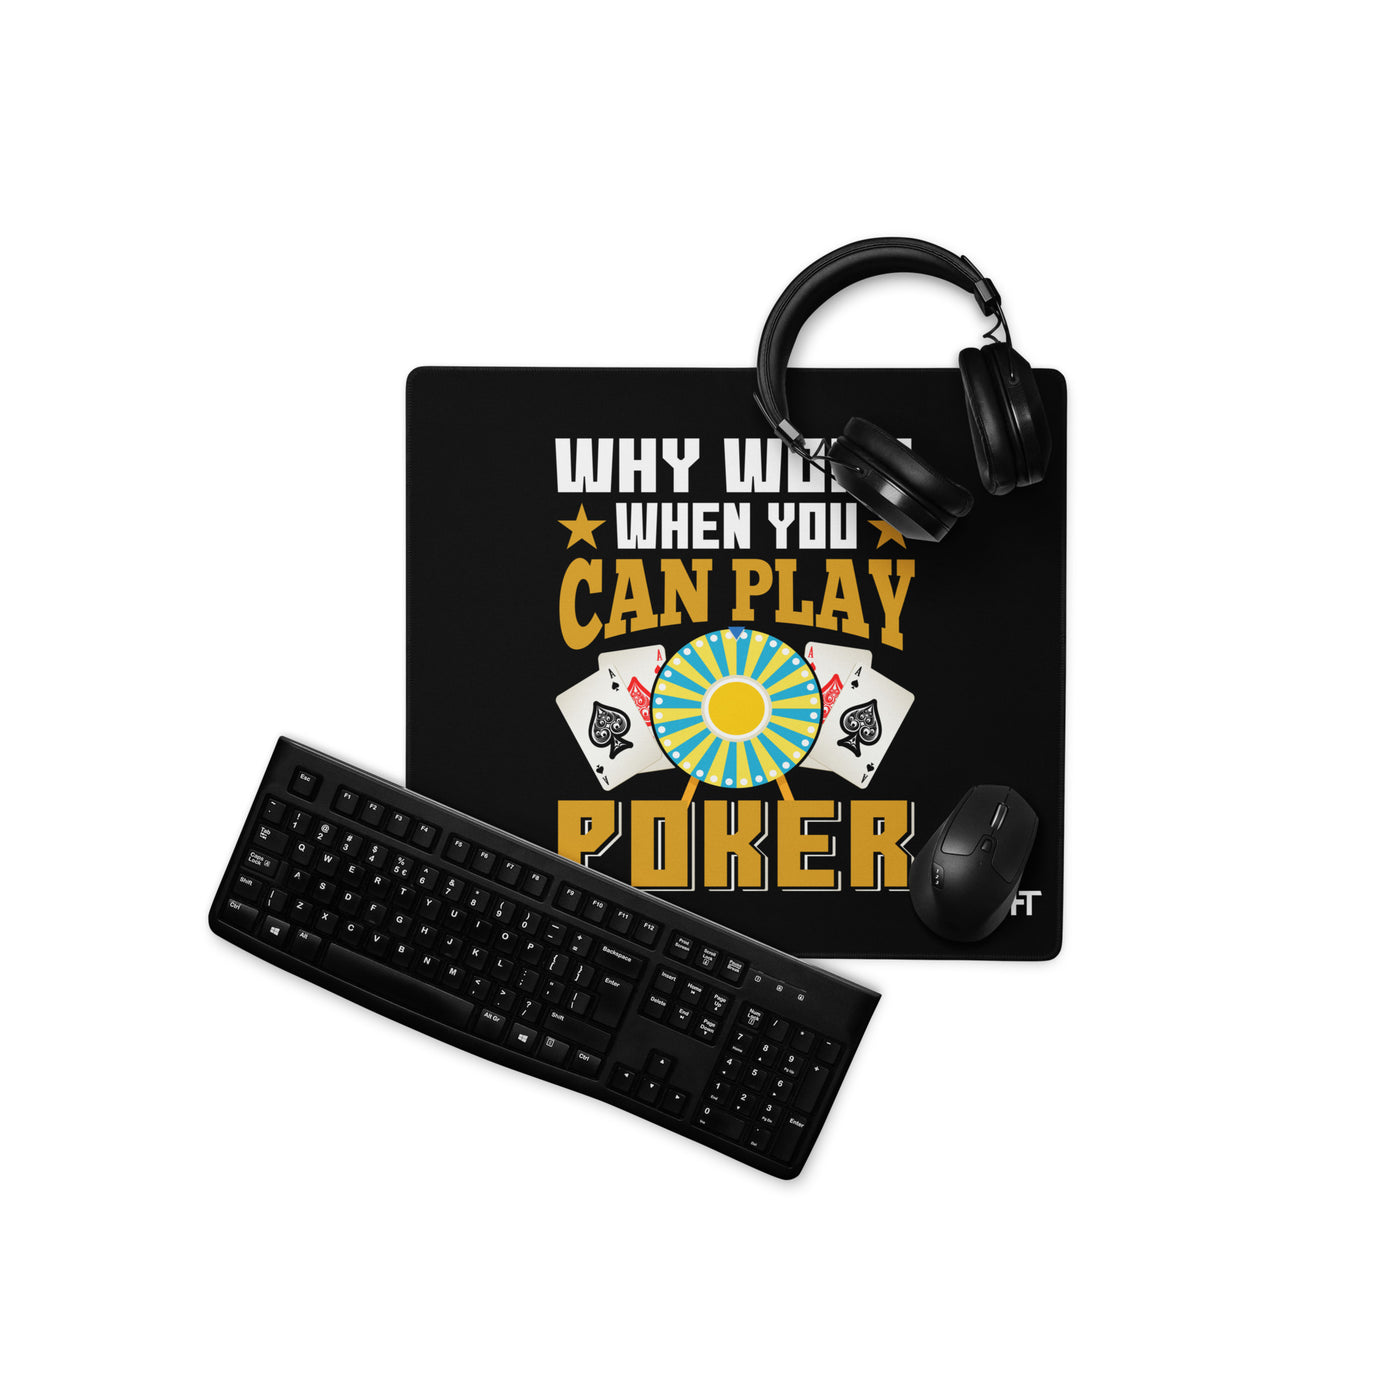 Why Work when you can Play Poker - Desk Mat